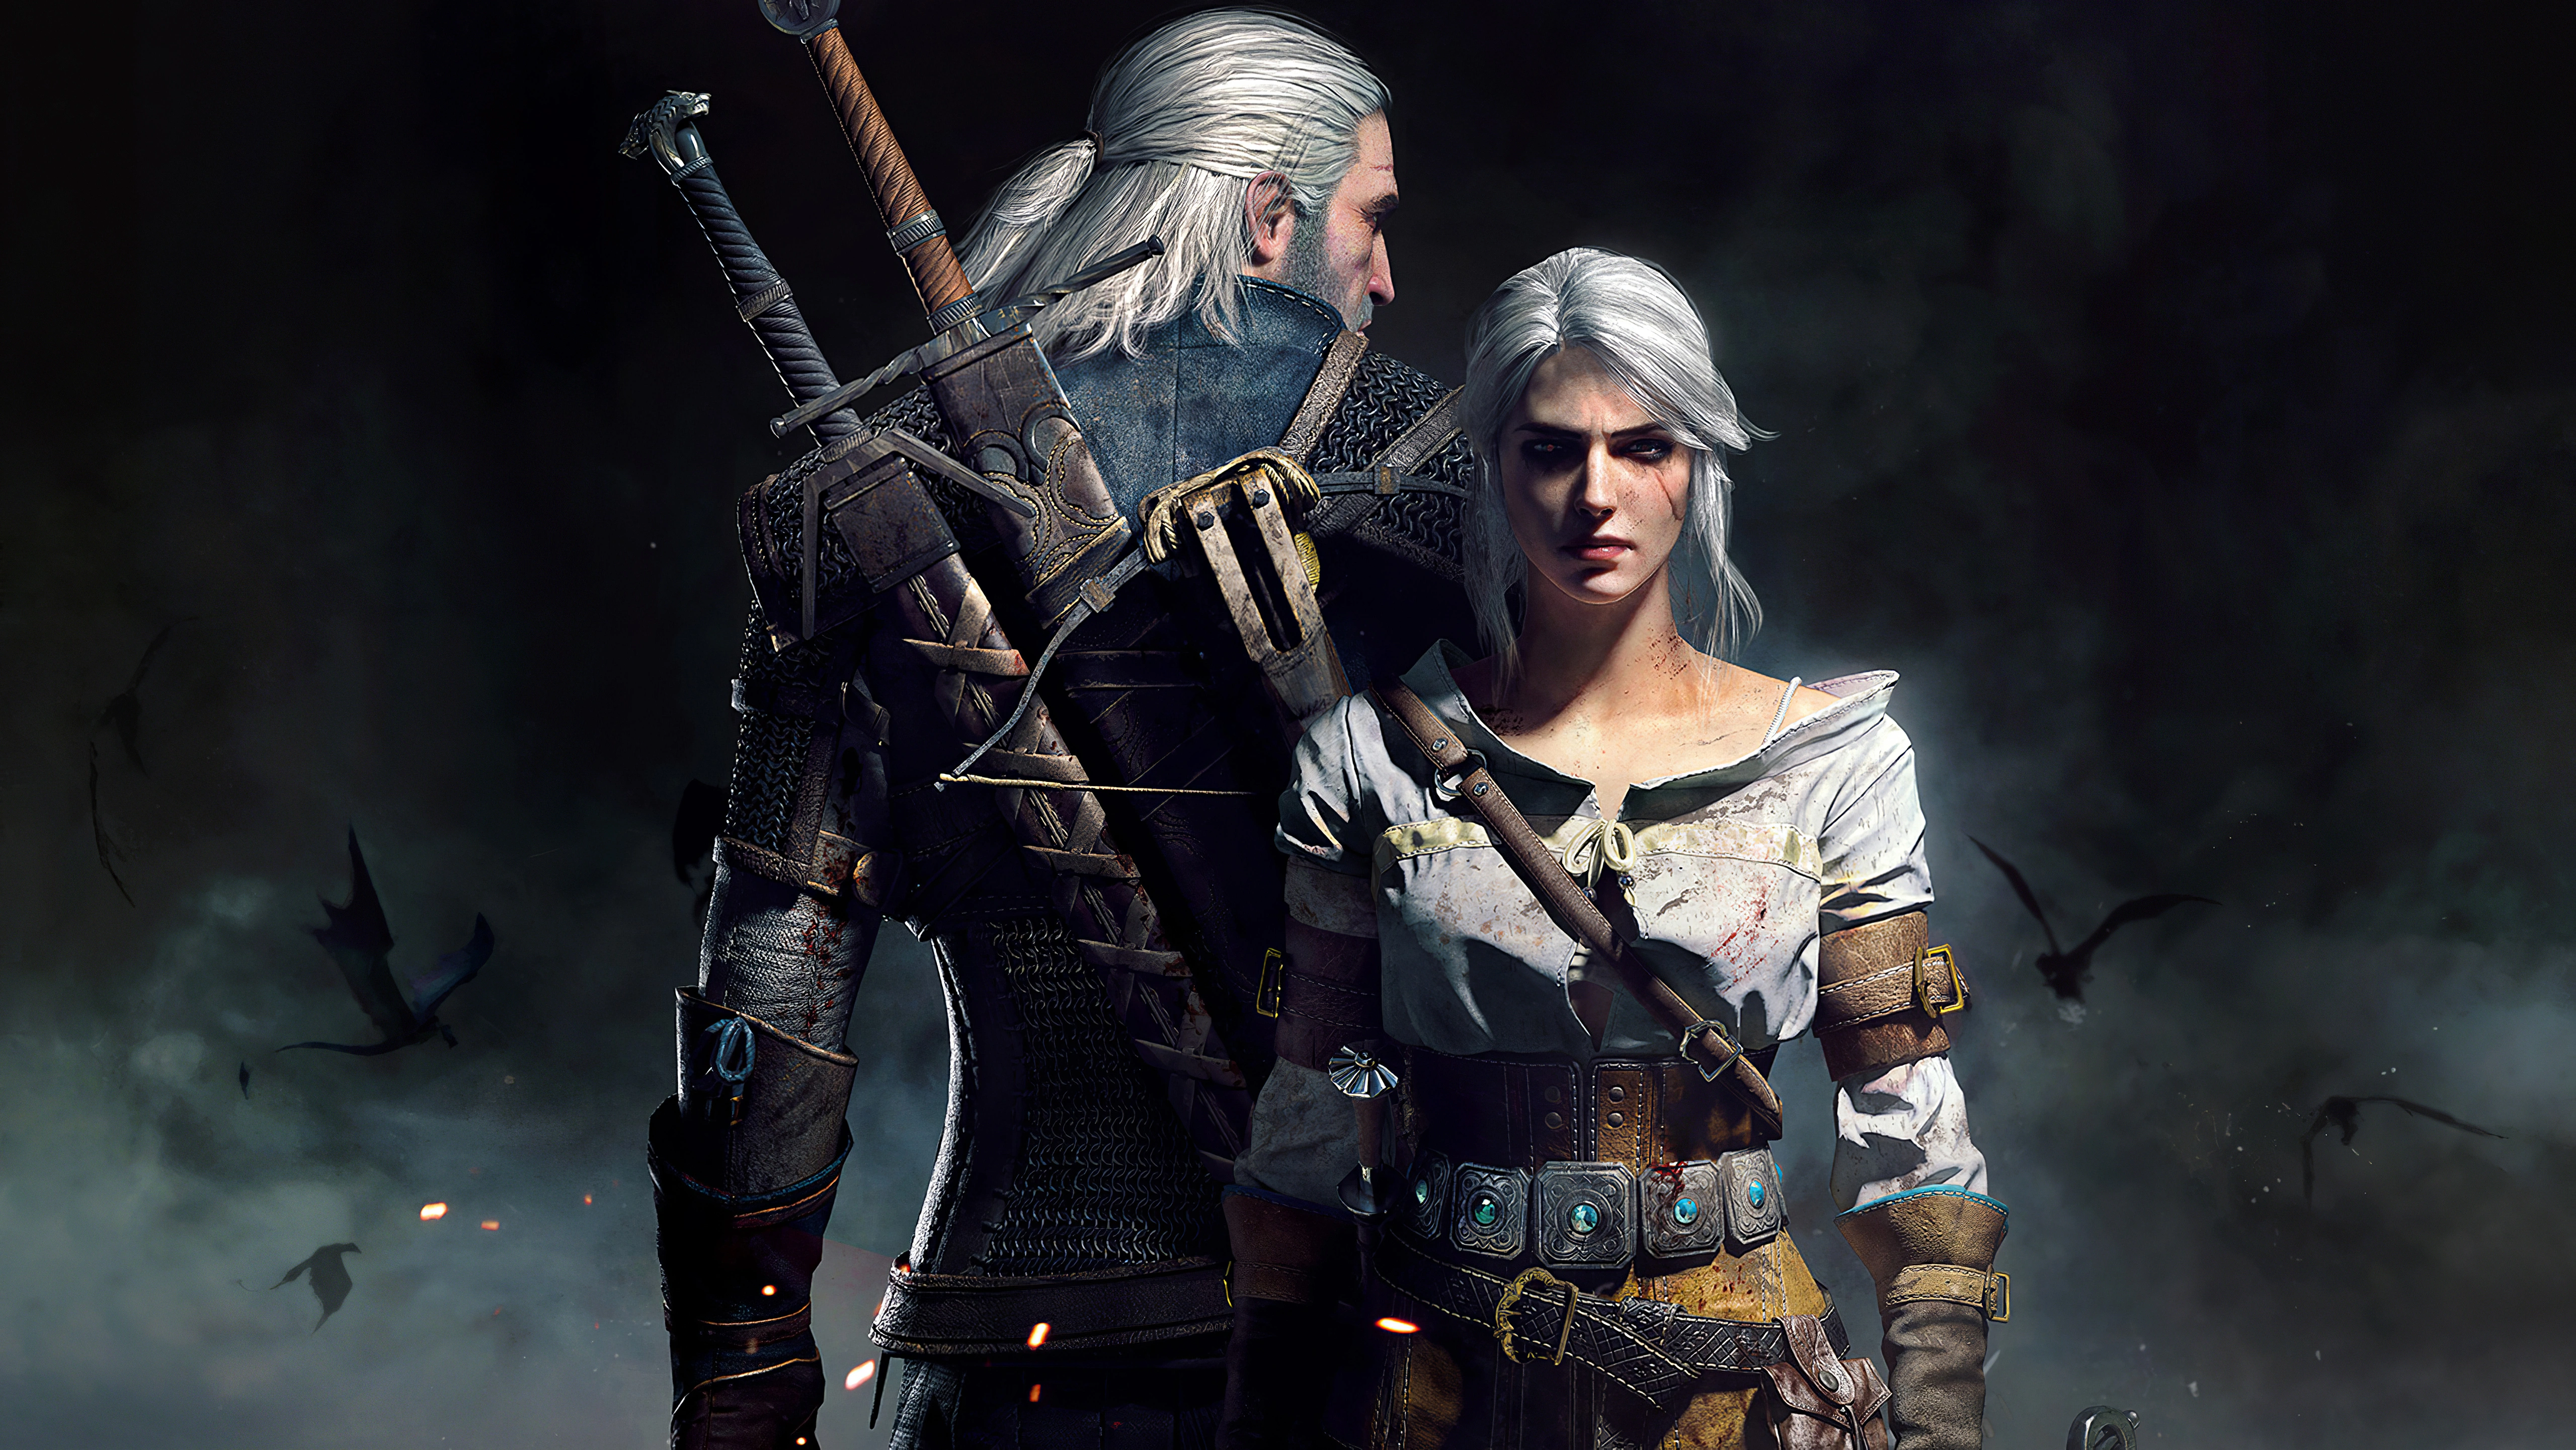 The Witcher 3: Wild Hunt wallpapers or desktop backgrounds